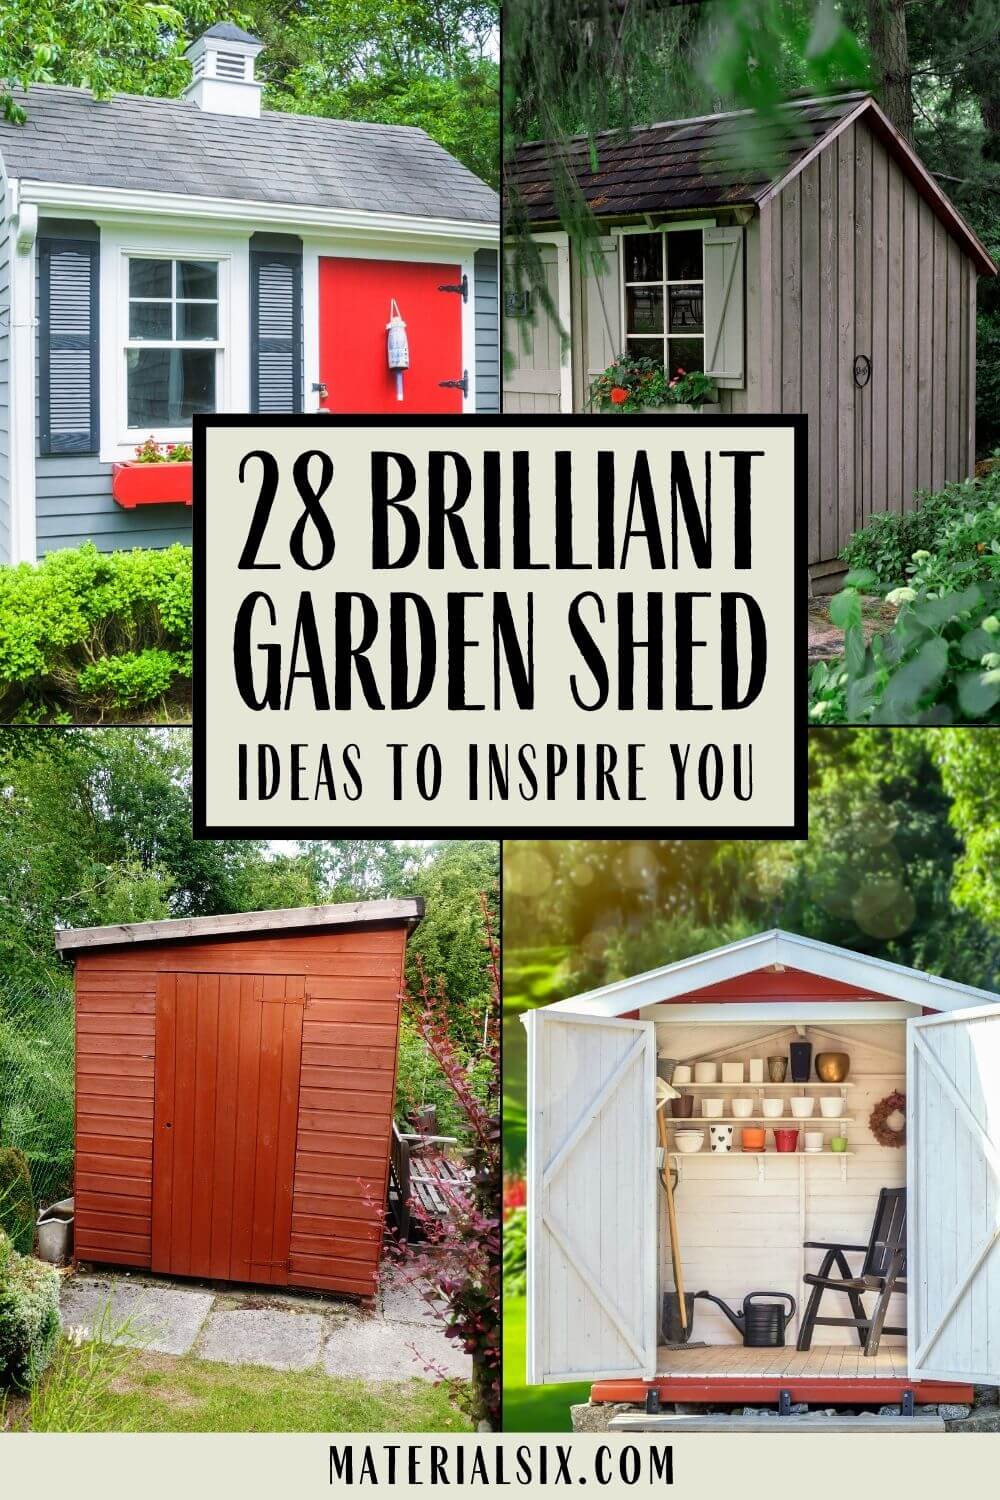 28 Brilliant Garden Shed Ideas to Inspire You (1)